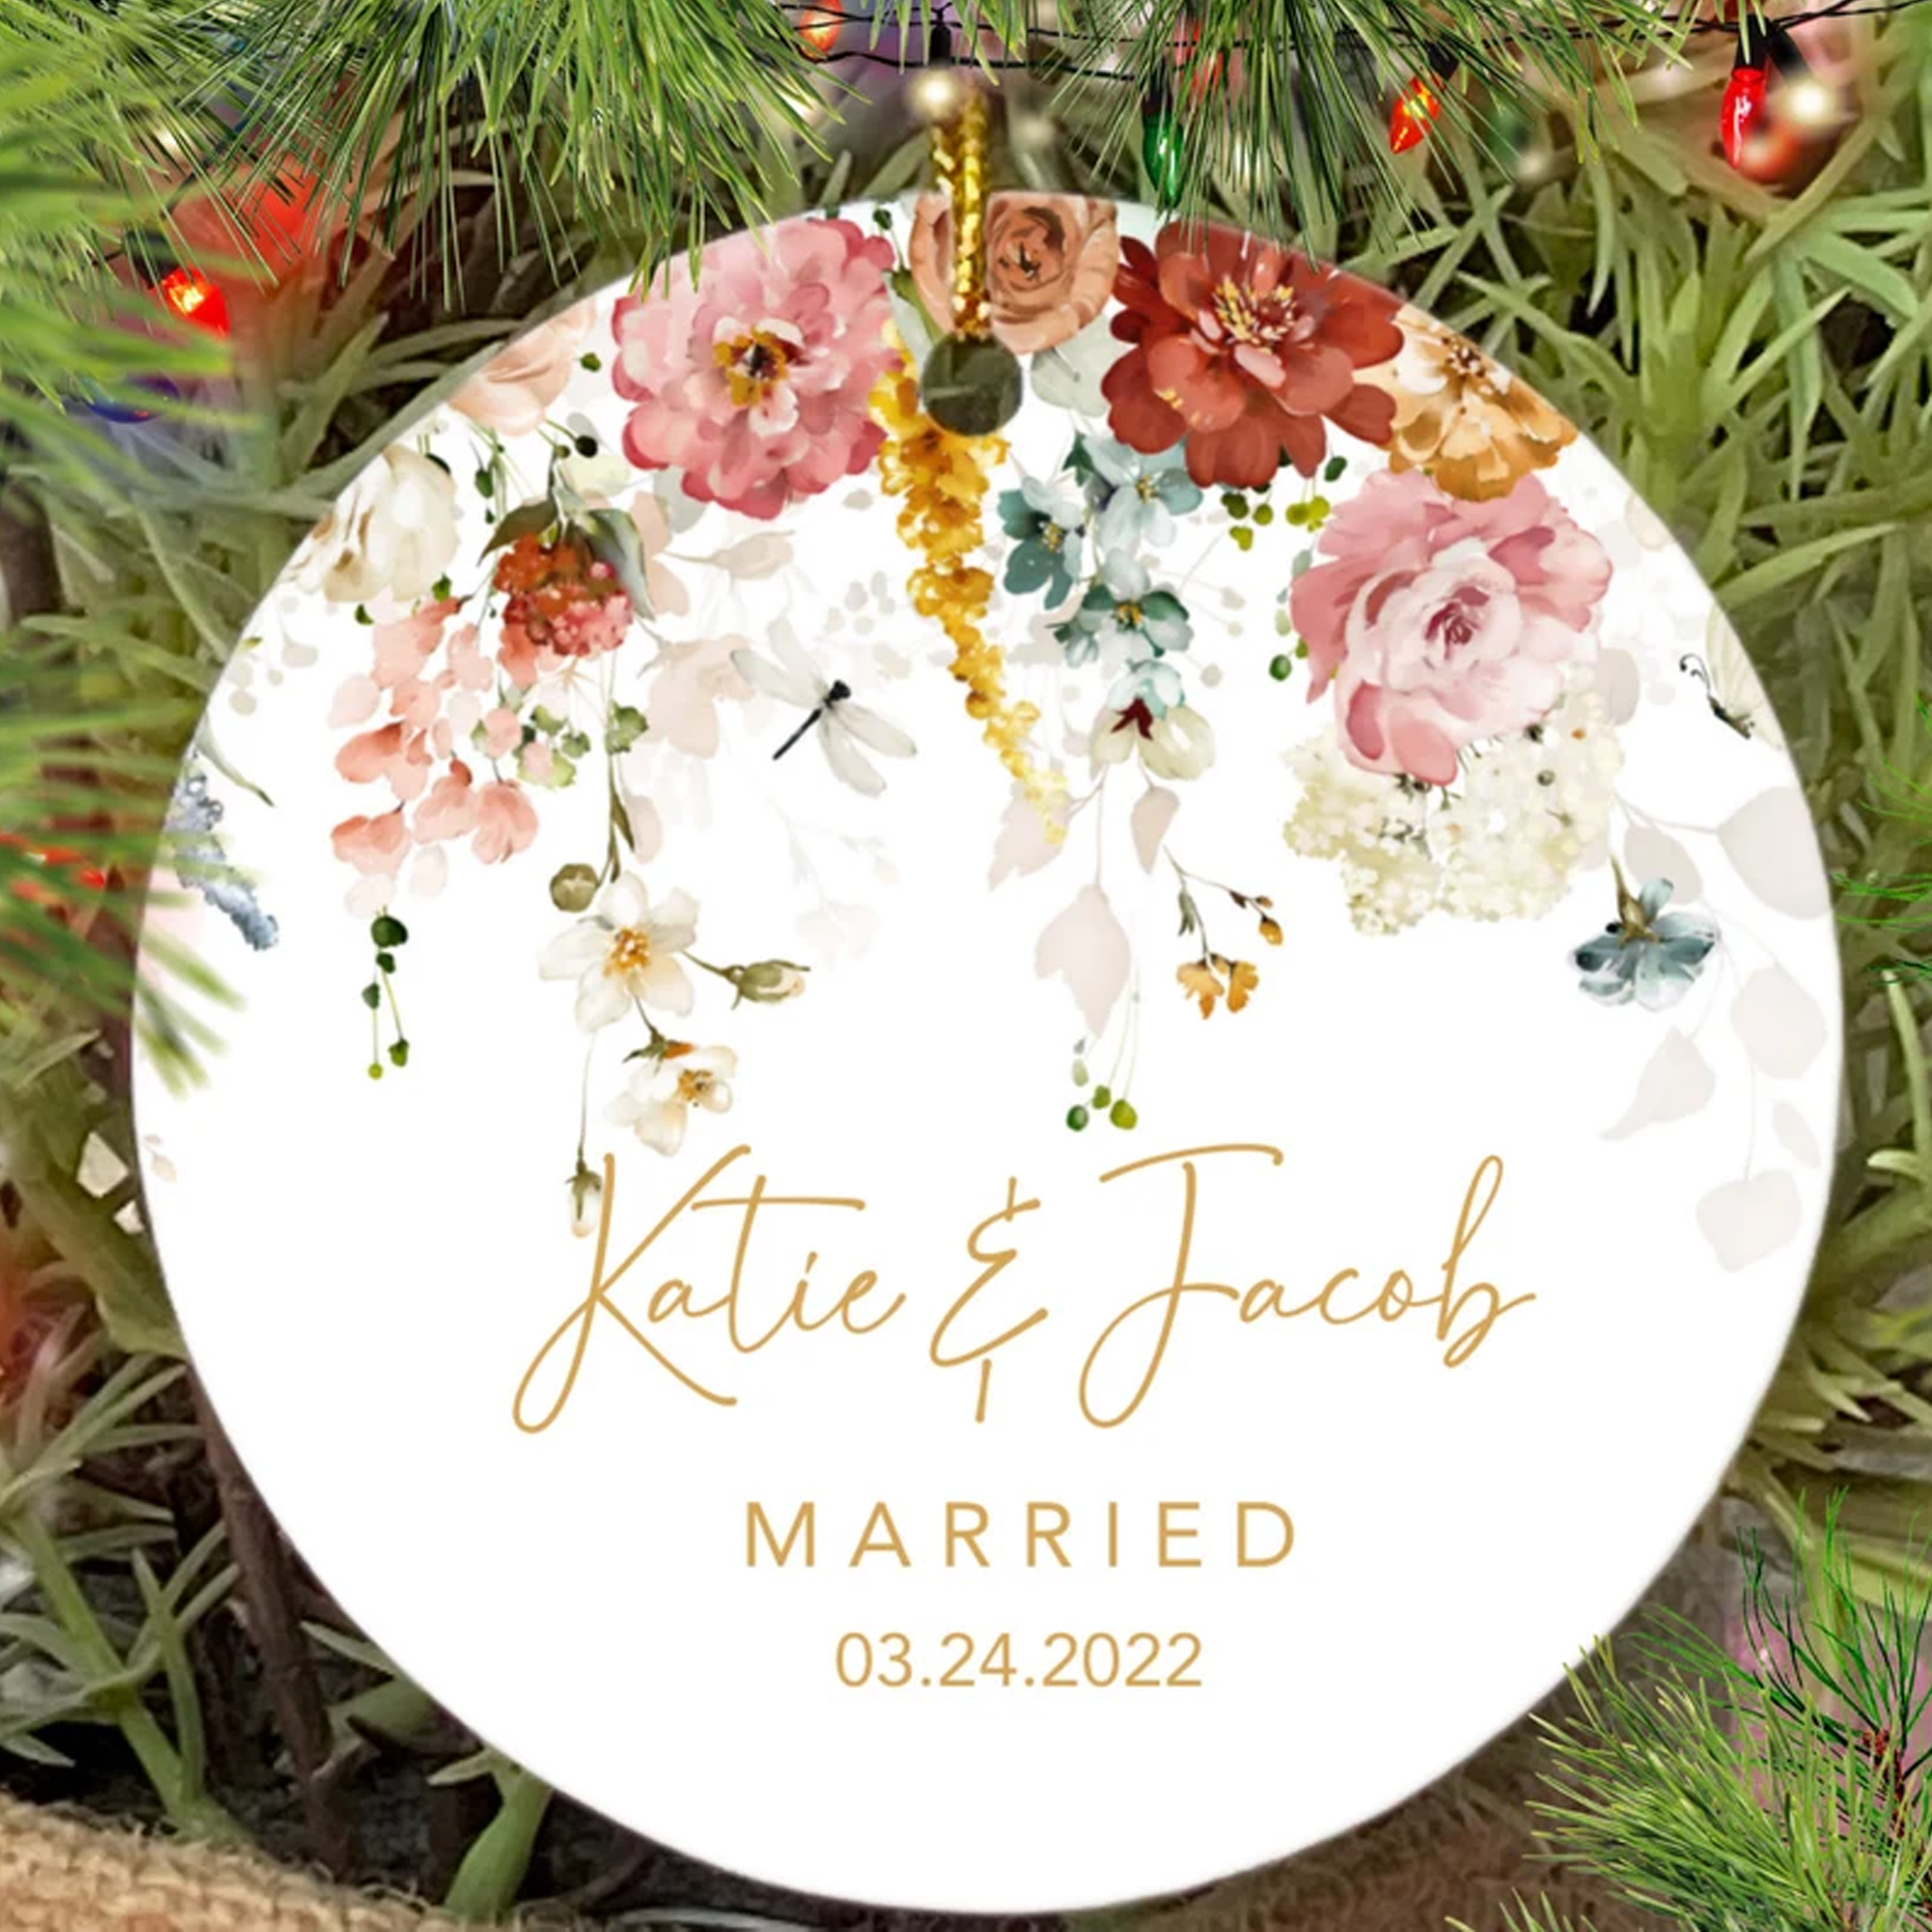 Personalized Married Ornament Mr Mrs Ornament Our First Christmas Married Keepsake Wedding Gift Couples Ornament Newlywed Gift